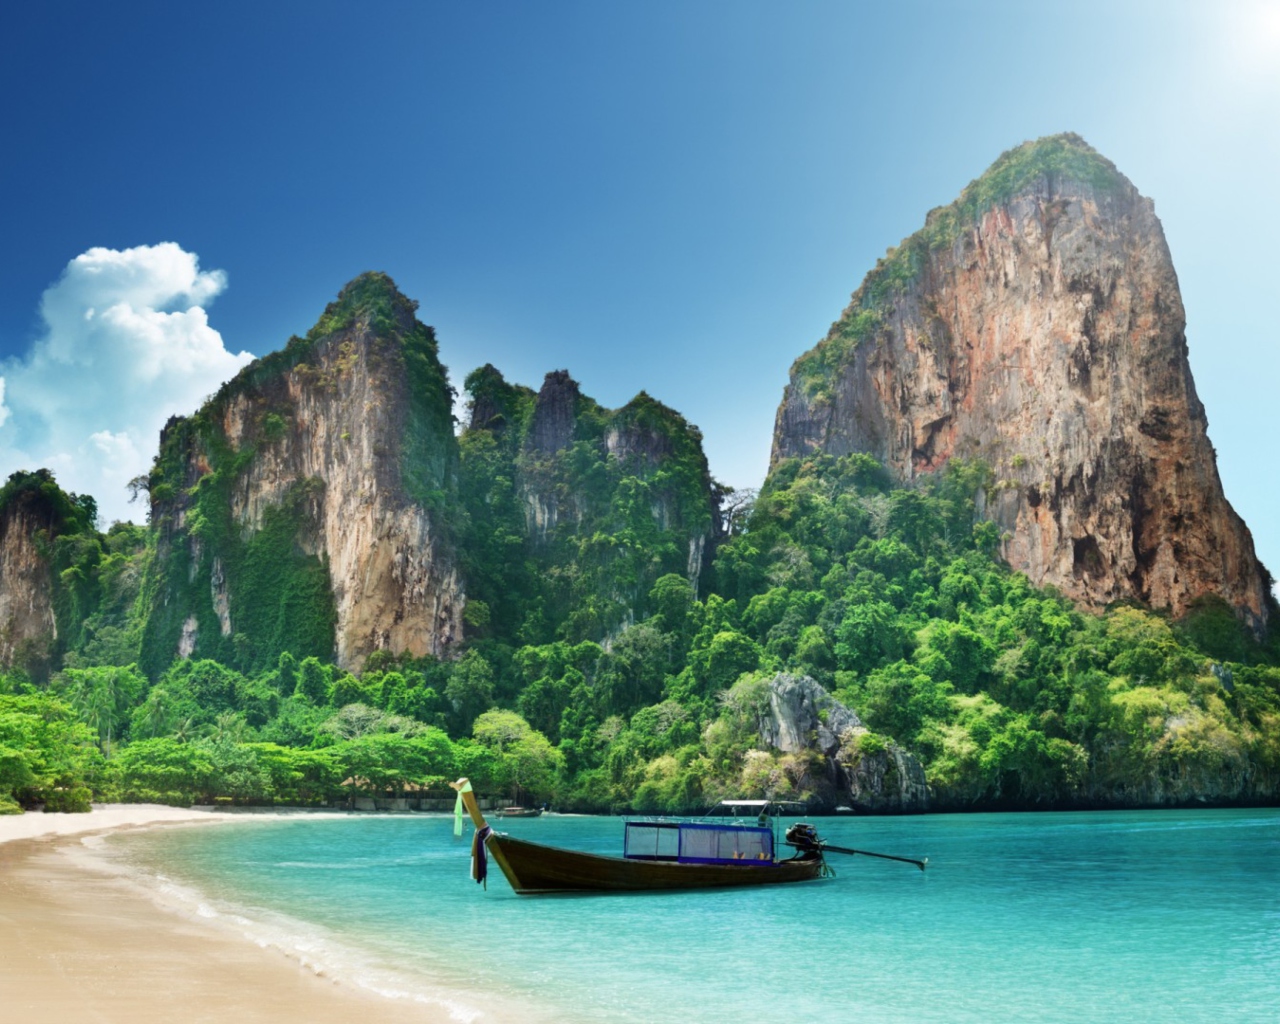 Das Boat And Rocks In Thailand Wallpaper 1280x1024